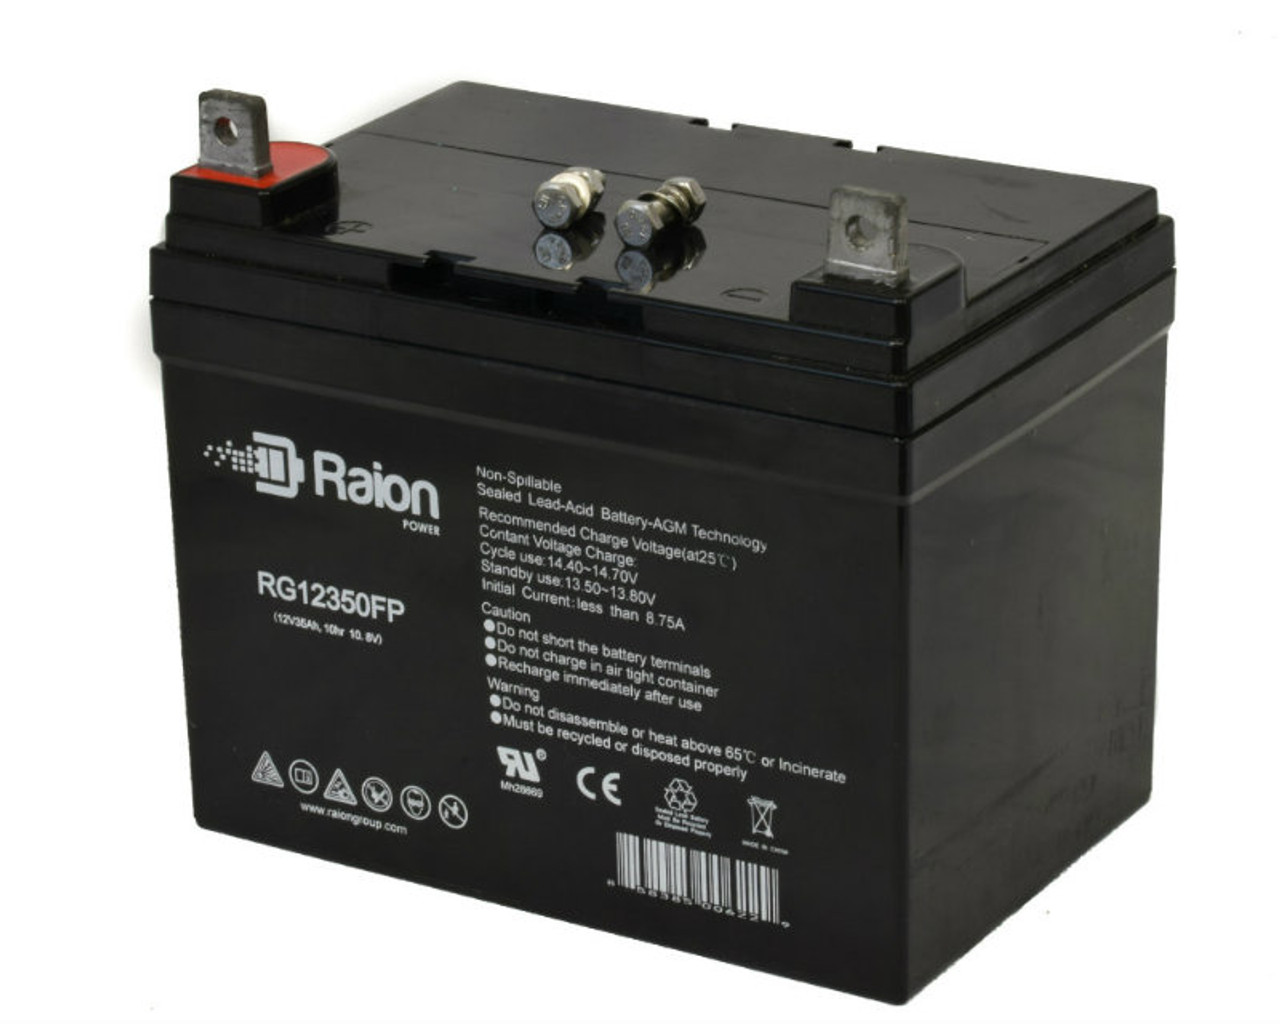 Raion Power Replacement 12V 35Ah RG12350FP Battery for Case International 110XC